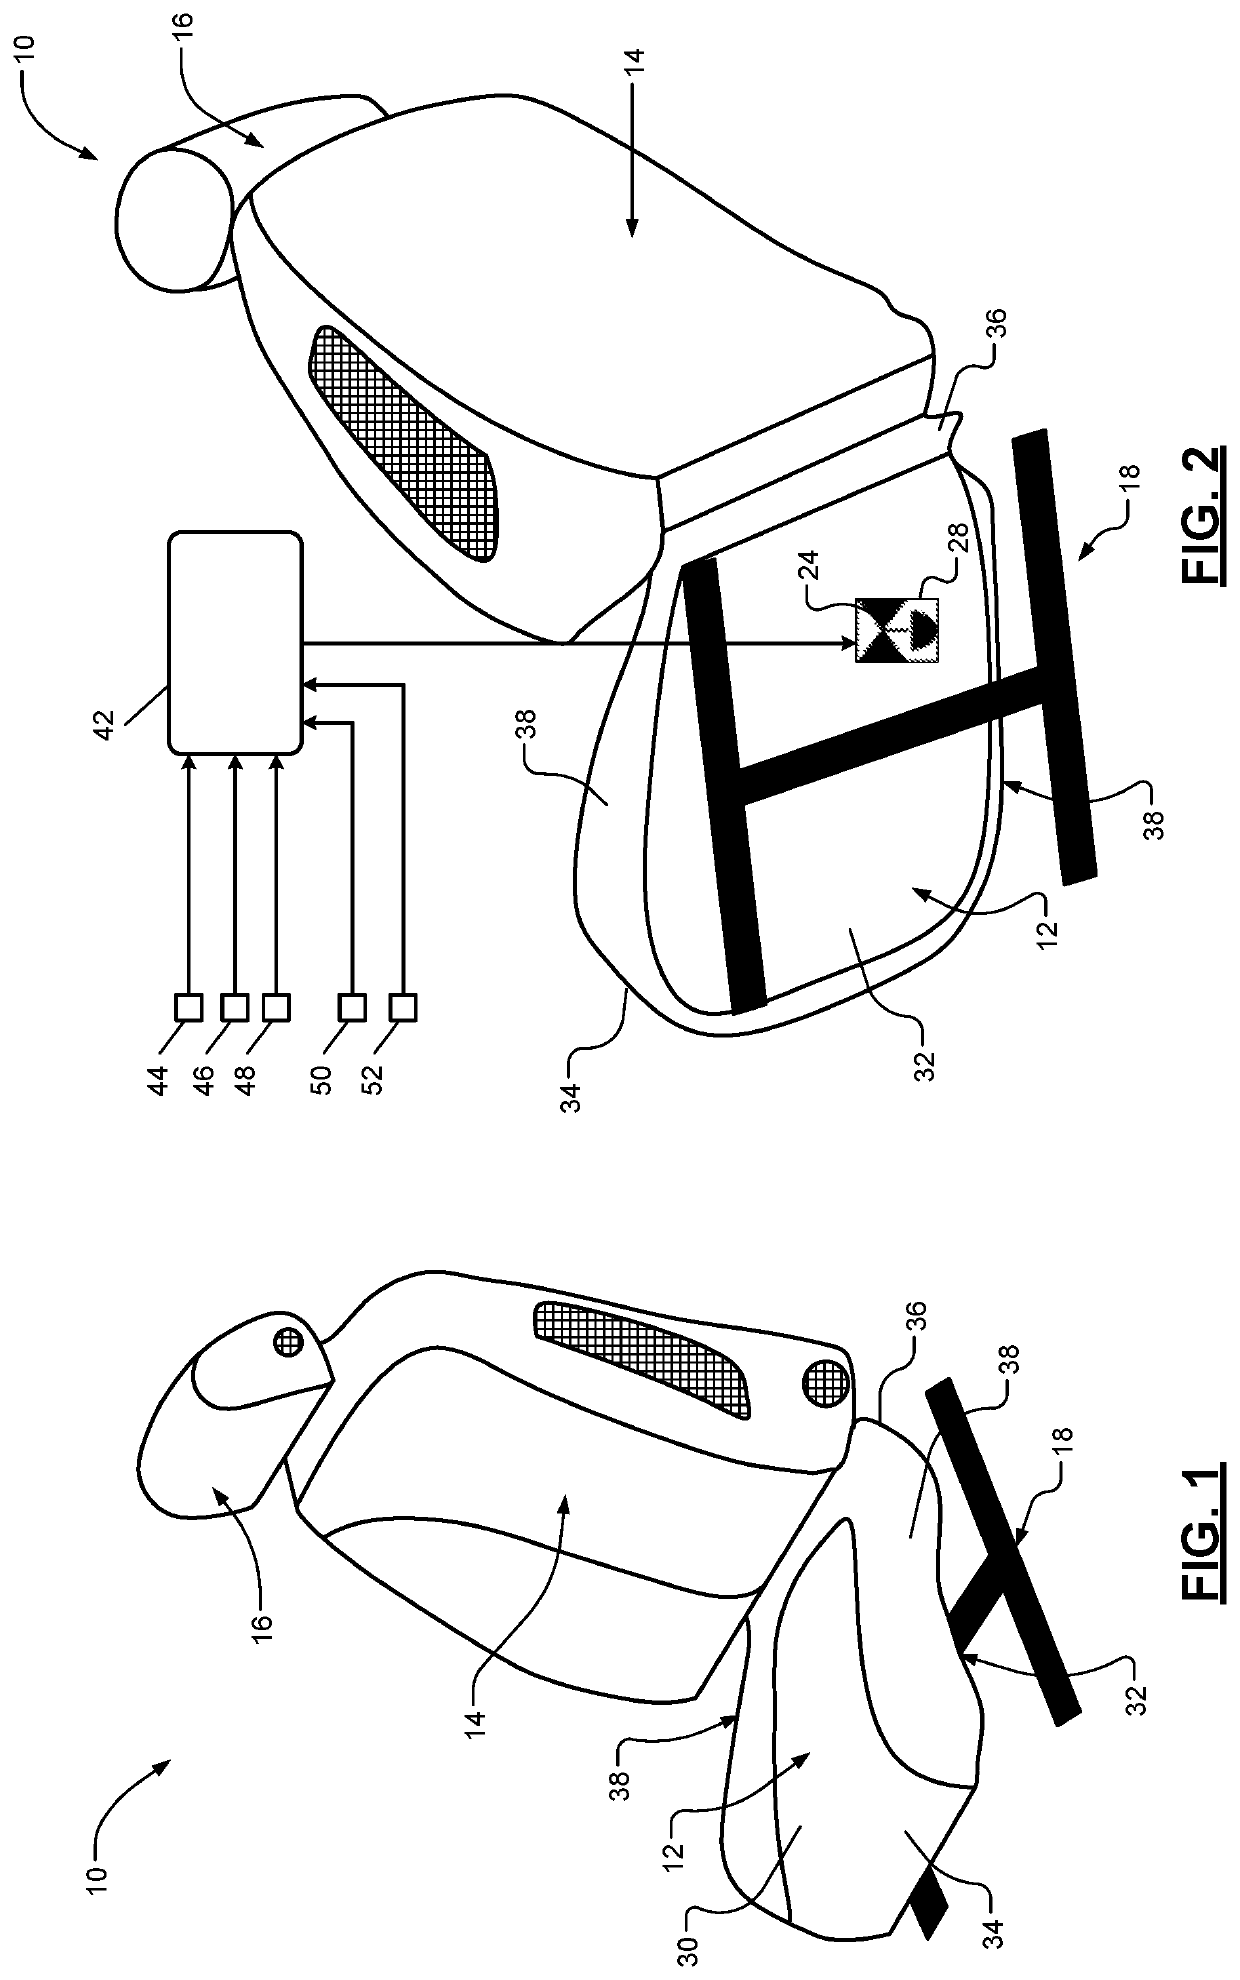 Vehicle seat assembly including a seat cover enclosing a seat cushion and a valve extending through the seat cover and regulating airflow out of the seat cushion